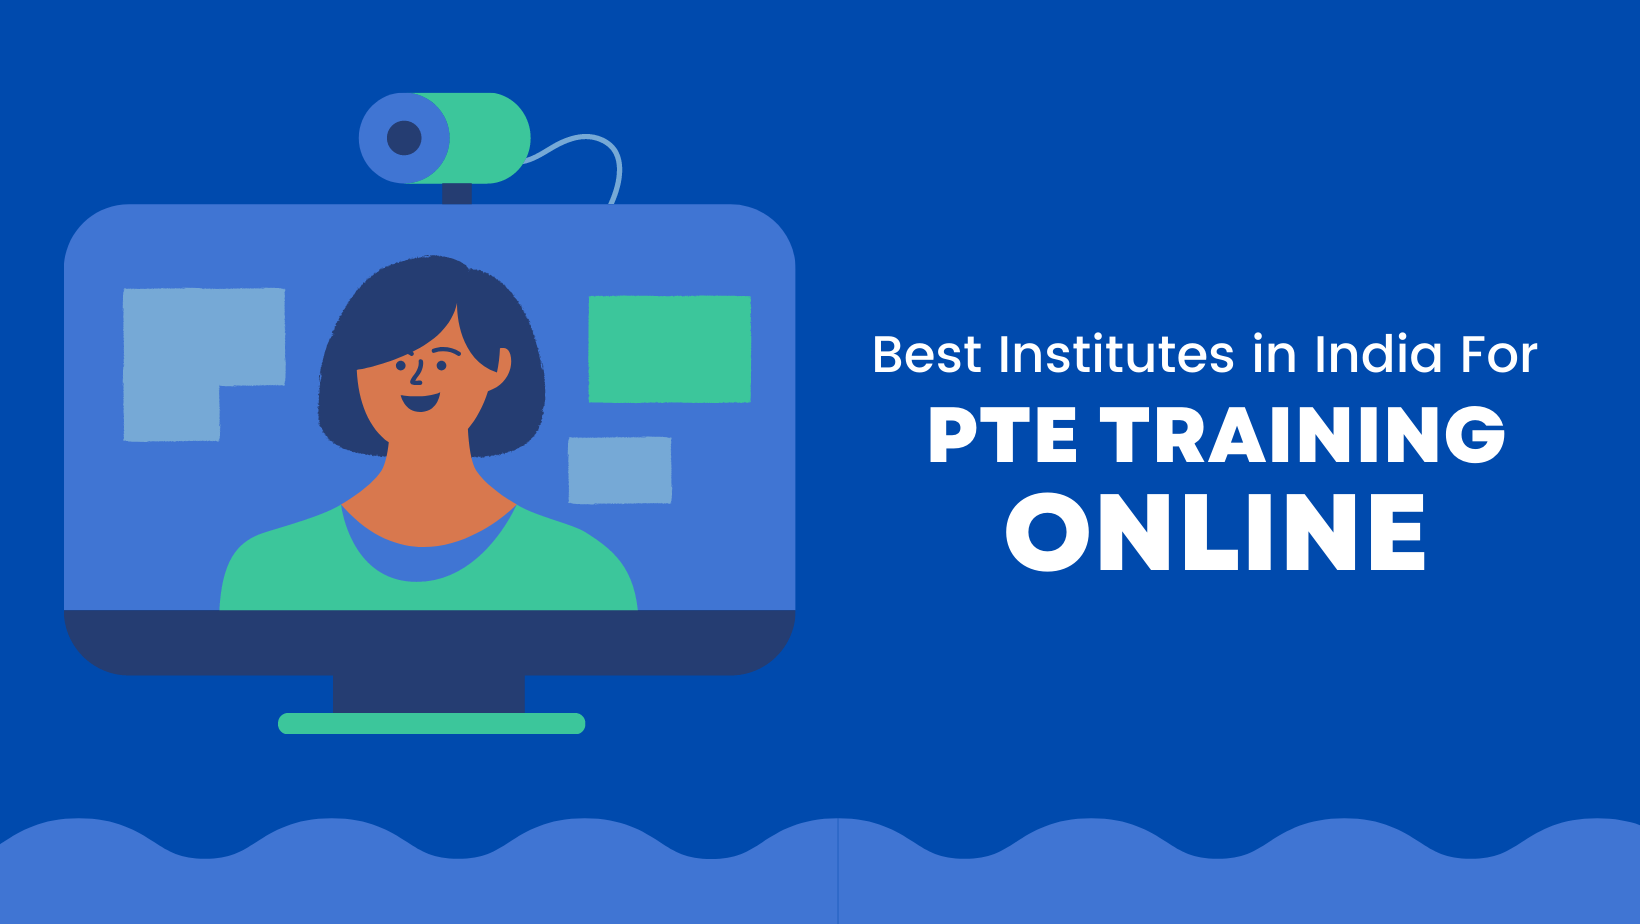 The Best Institutes in India To Pursue a PTE Training Online